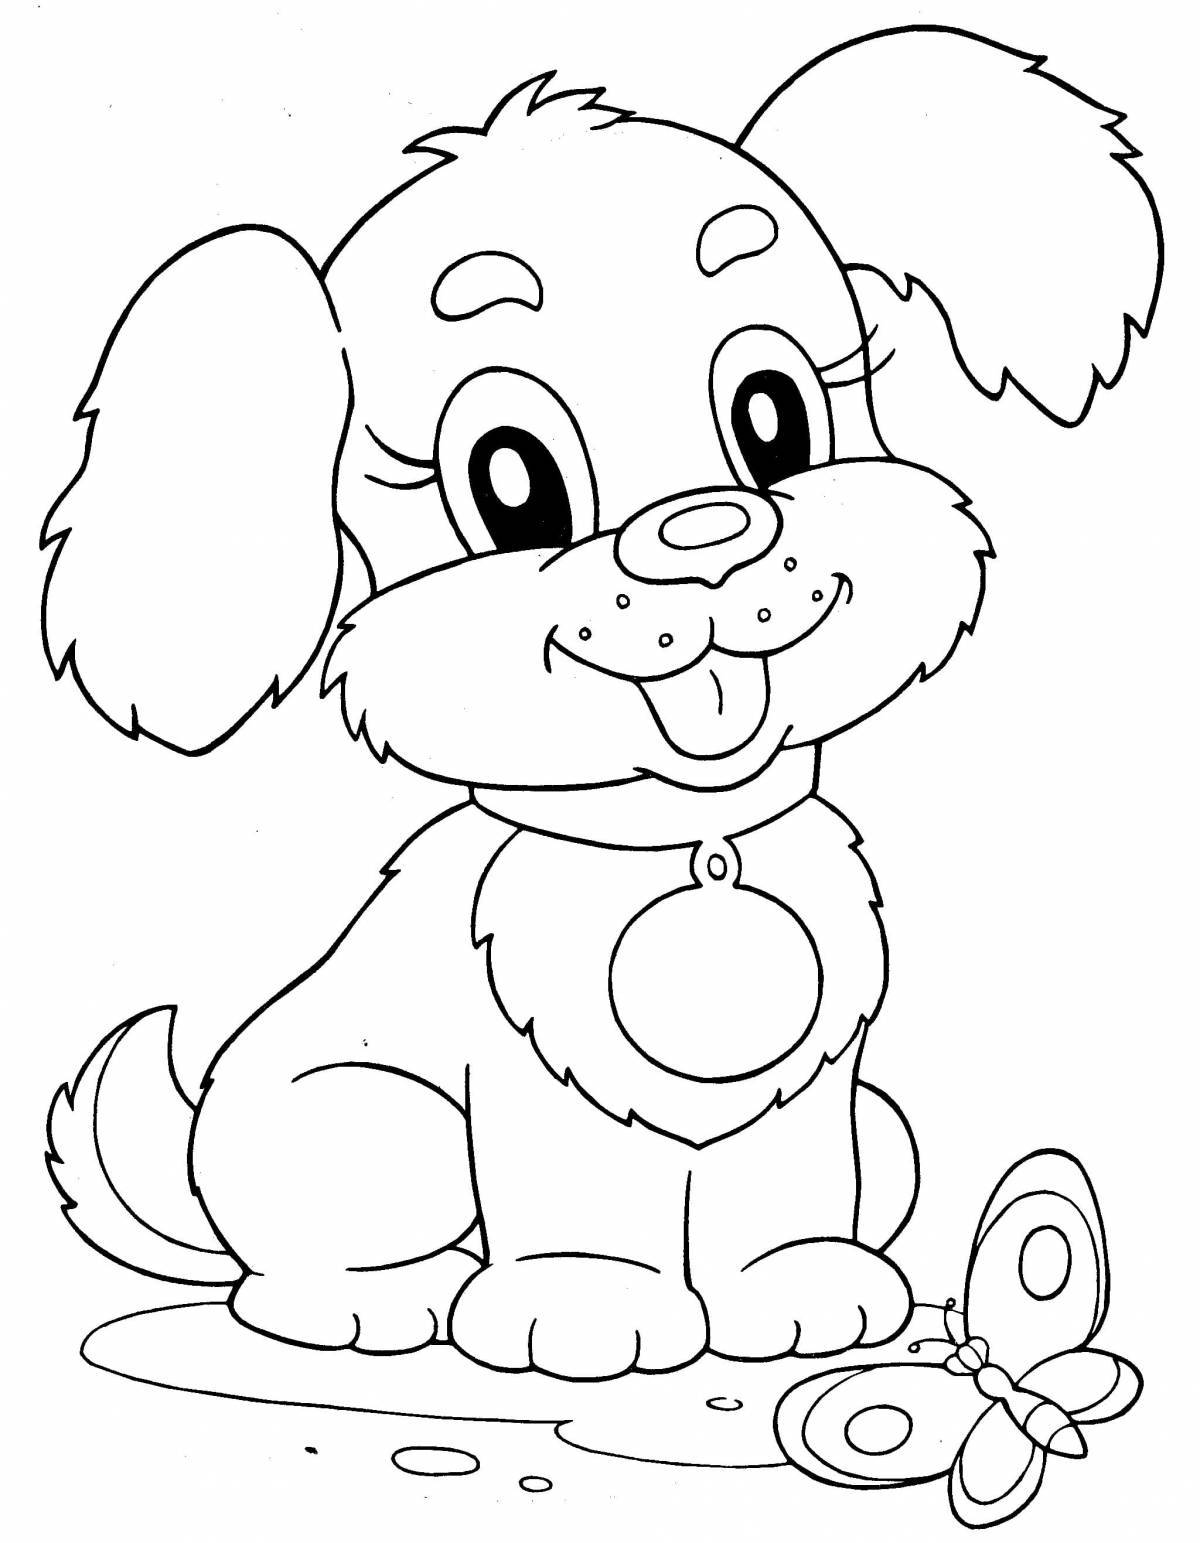 Photo Coloring pages animals for children 3-4 years old